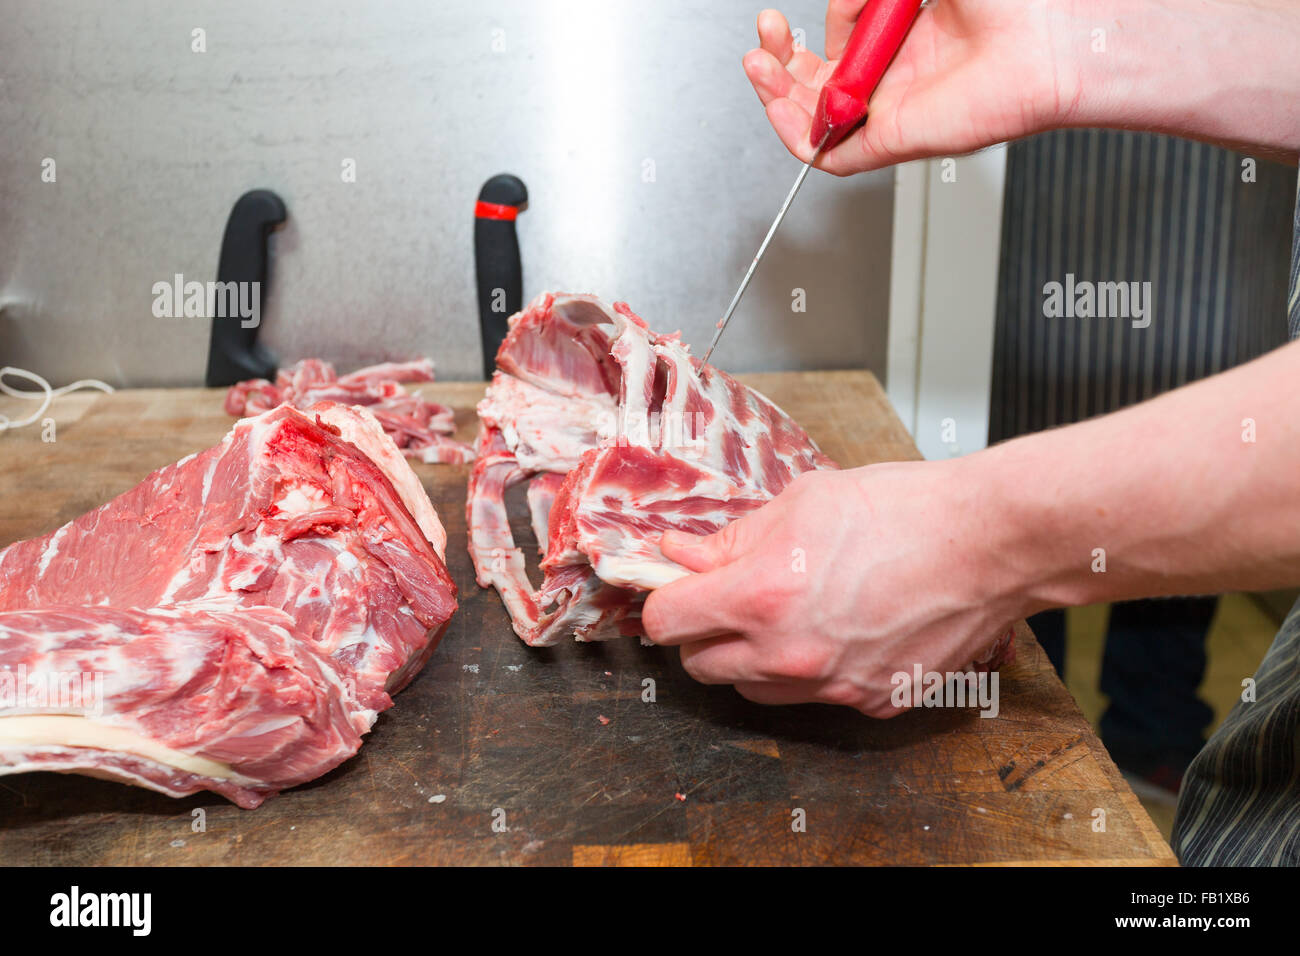 Butcher cutting meat up on a butchers board showing hands and knife. Stock Photo